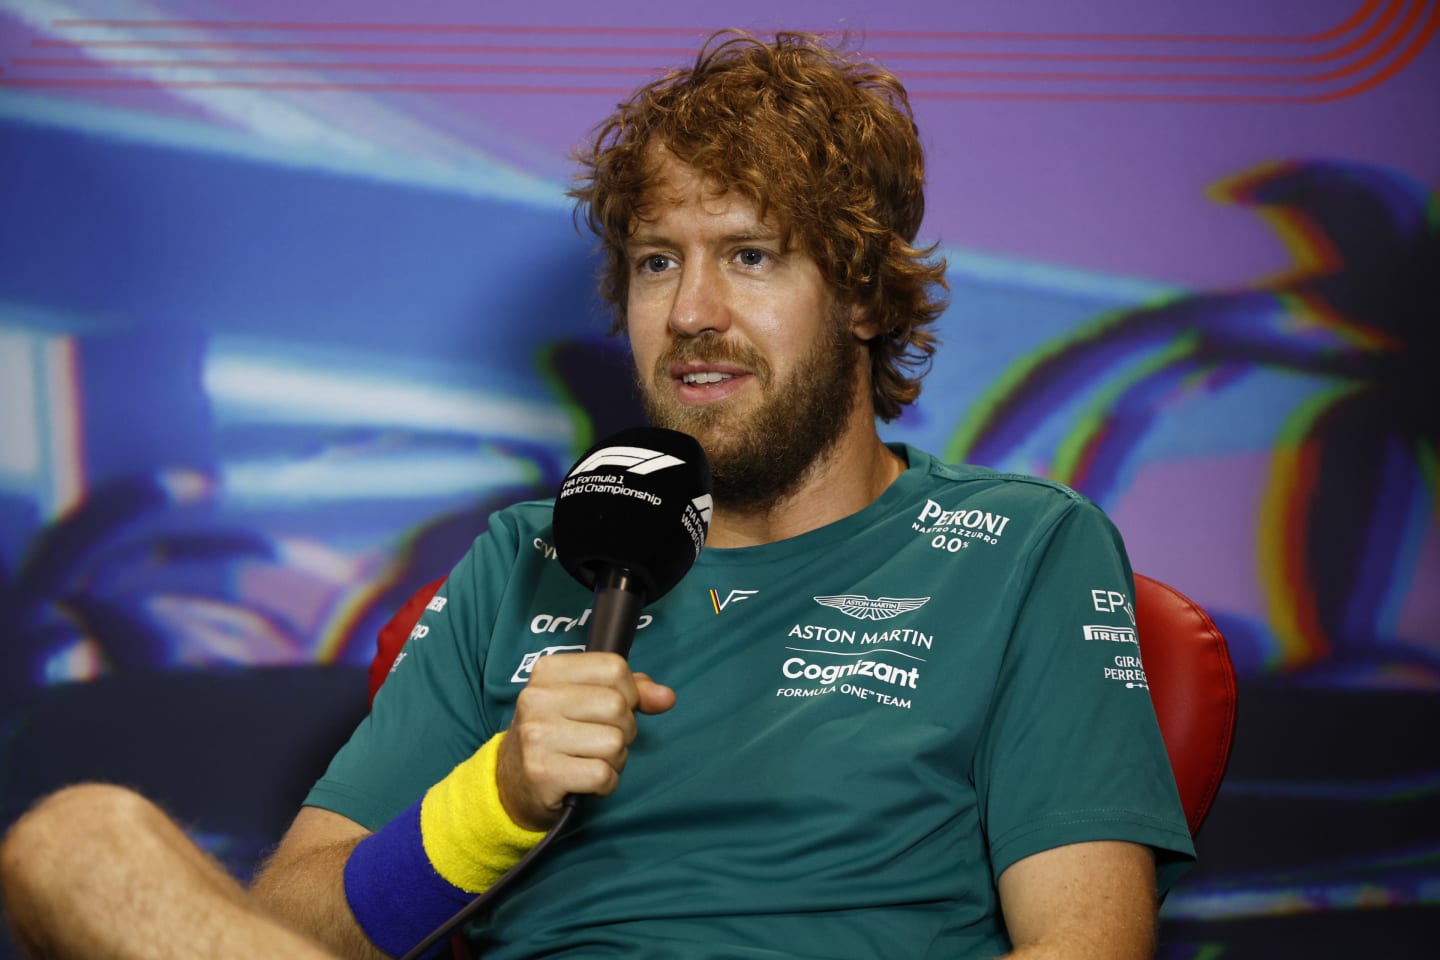 MIAMI, FLORIDA - MAY 06: Sebastian Vettel of Germany and Aston Martin F1 Team talks in the Drivers Press Conference prior to practice ahead of the F1 Grand Prix of Miami at the Miami International Autodrome on May 06, 2022 in Miami, Florida. (Photo by Jared C. Tilton/Getty Images)